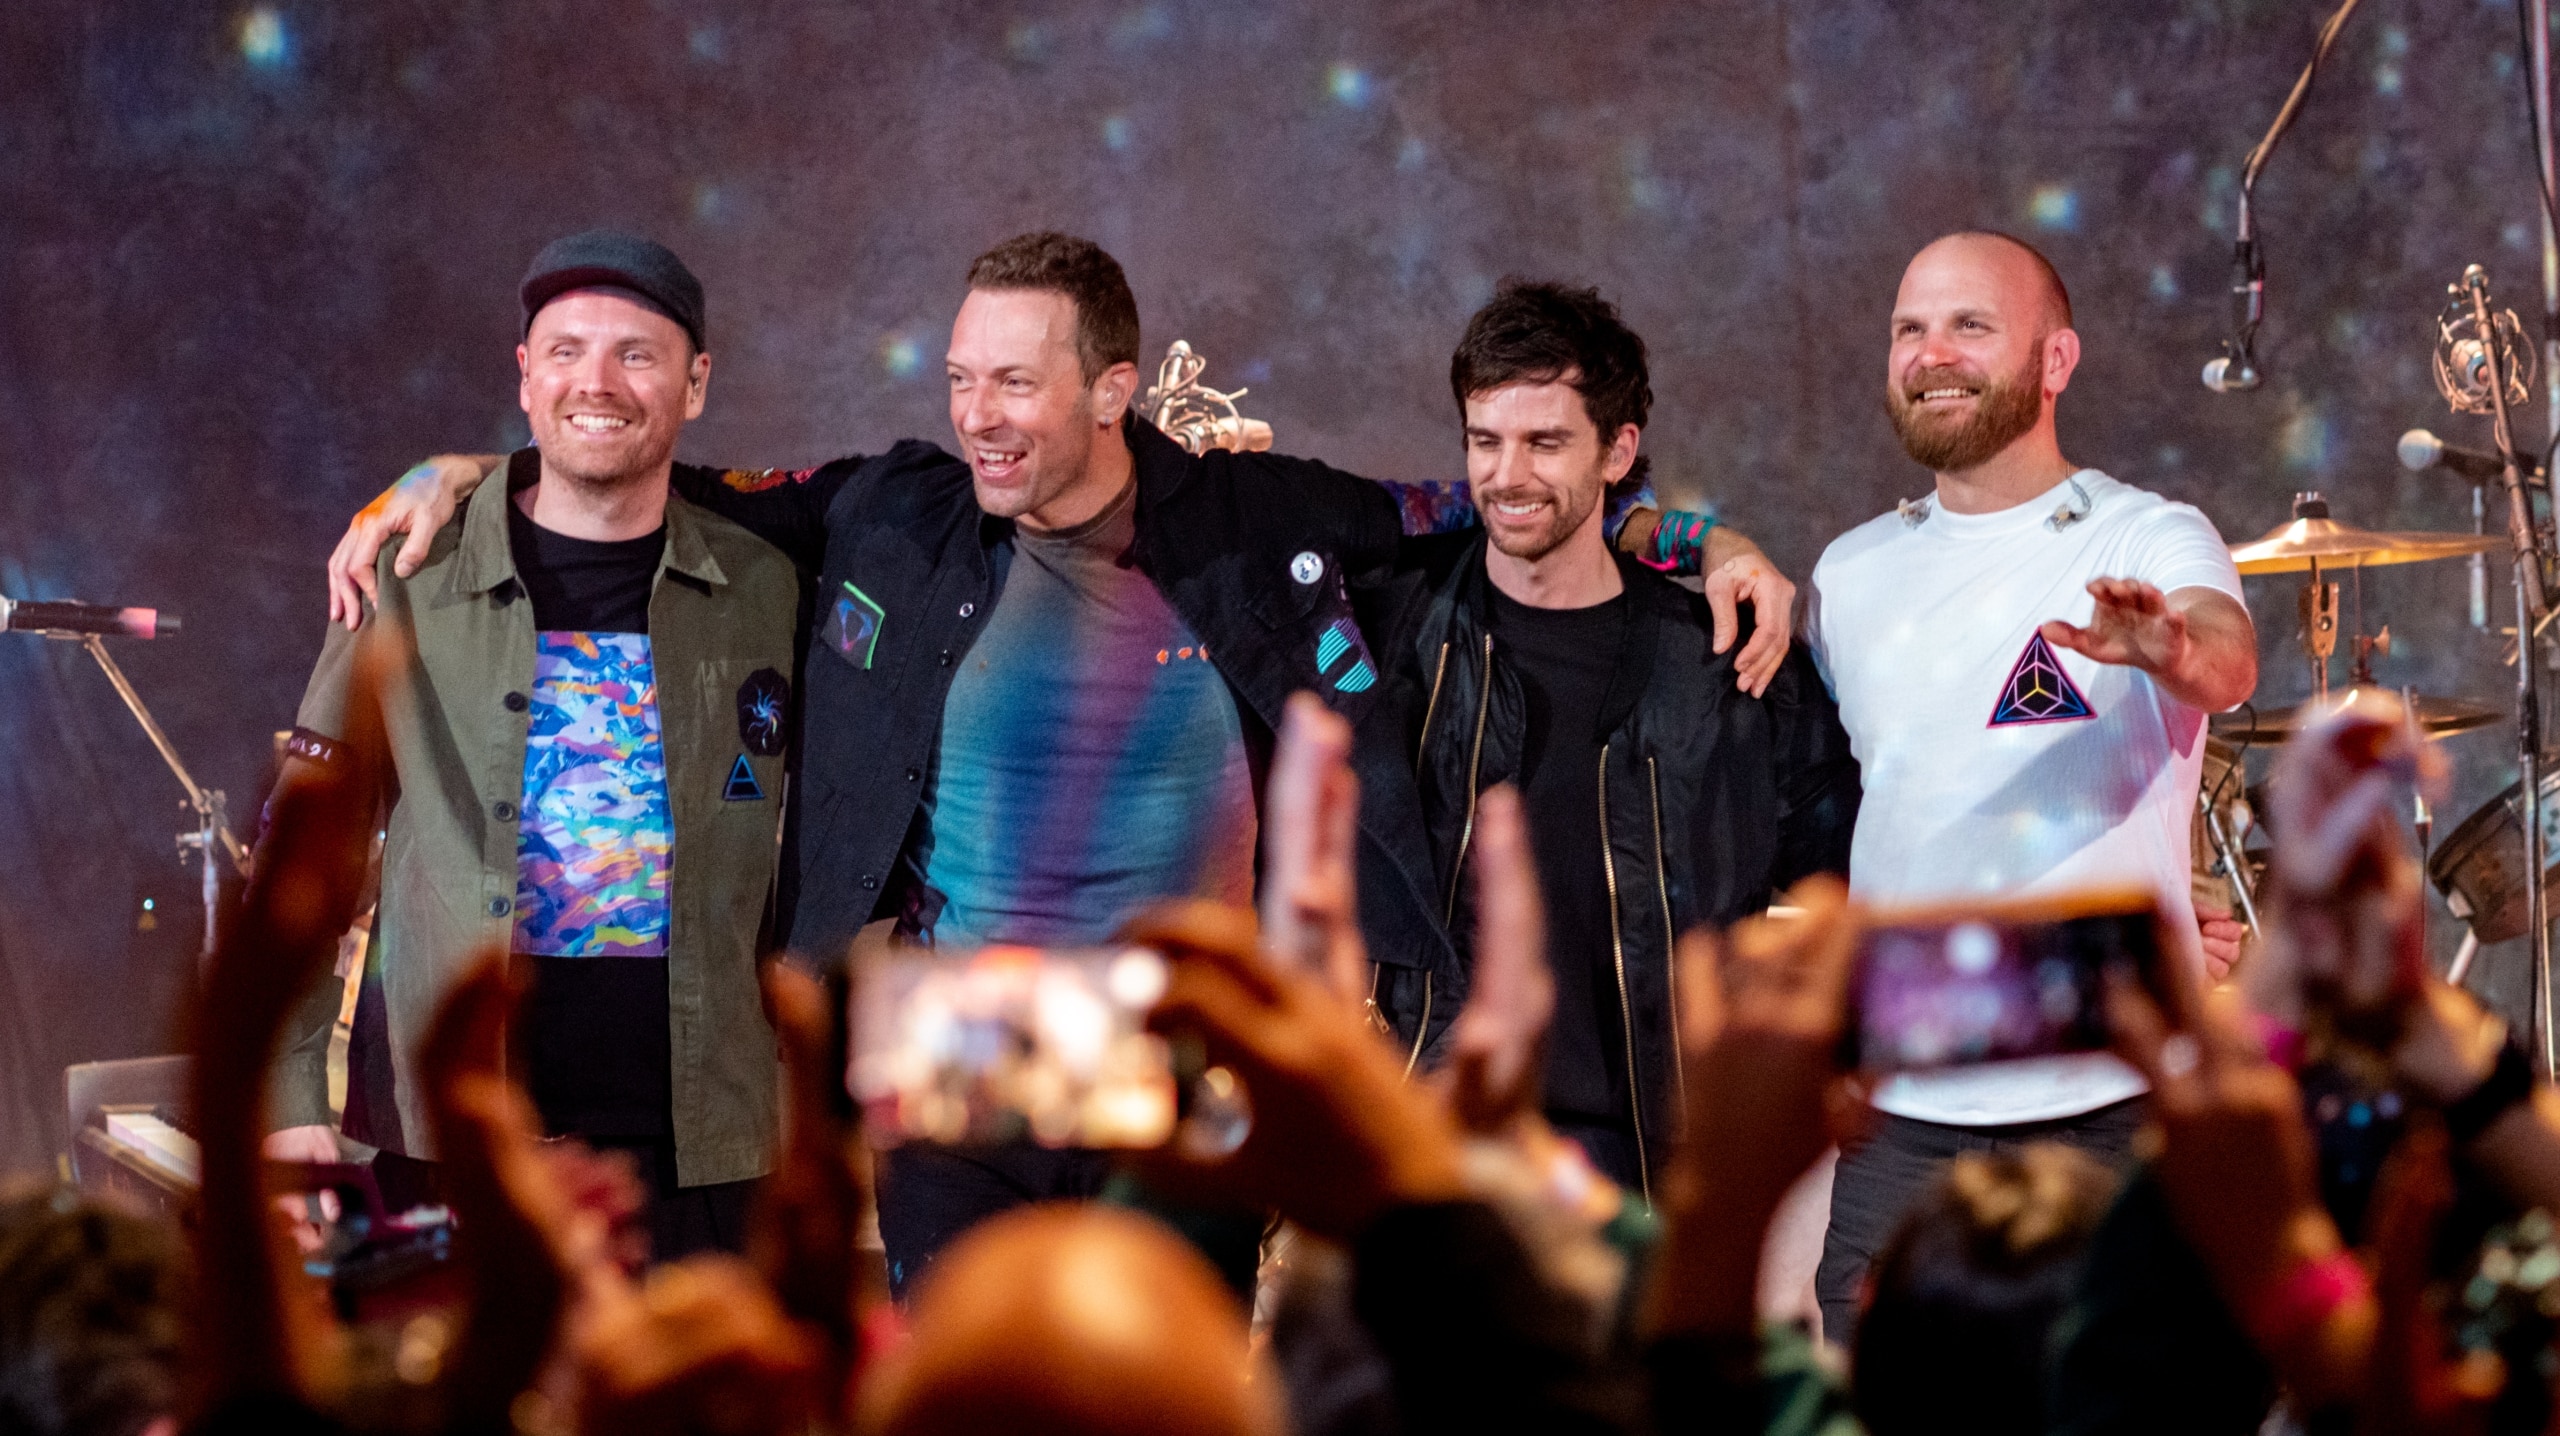 Top reasons to learn American Sign Language - Coldplay is Hiring Interpreters to Make Their Concerts More Accessible to All